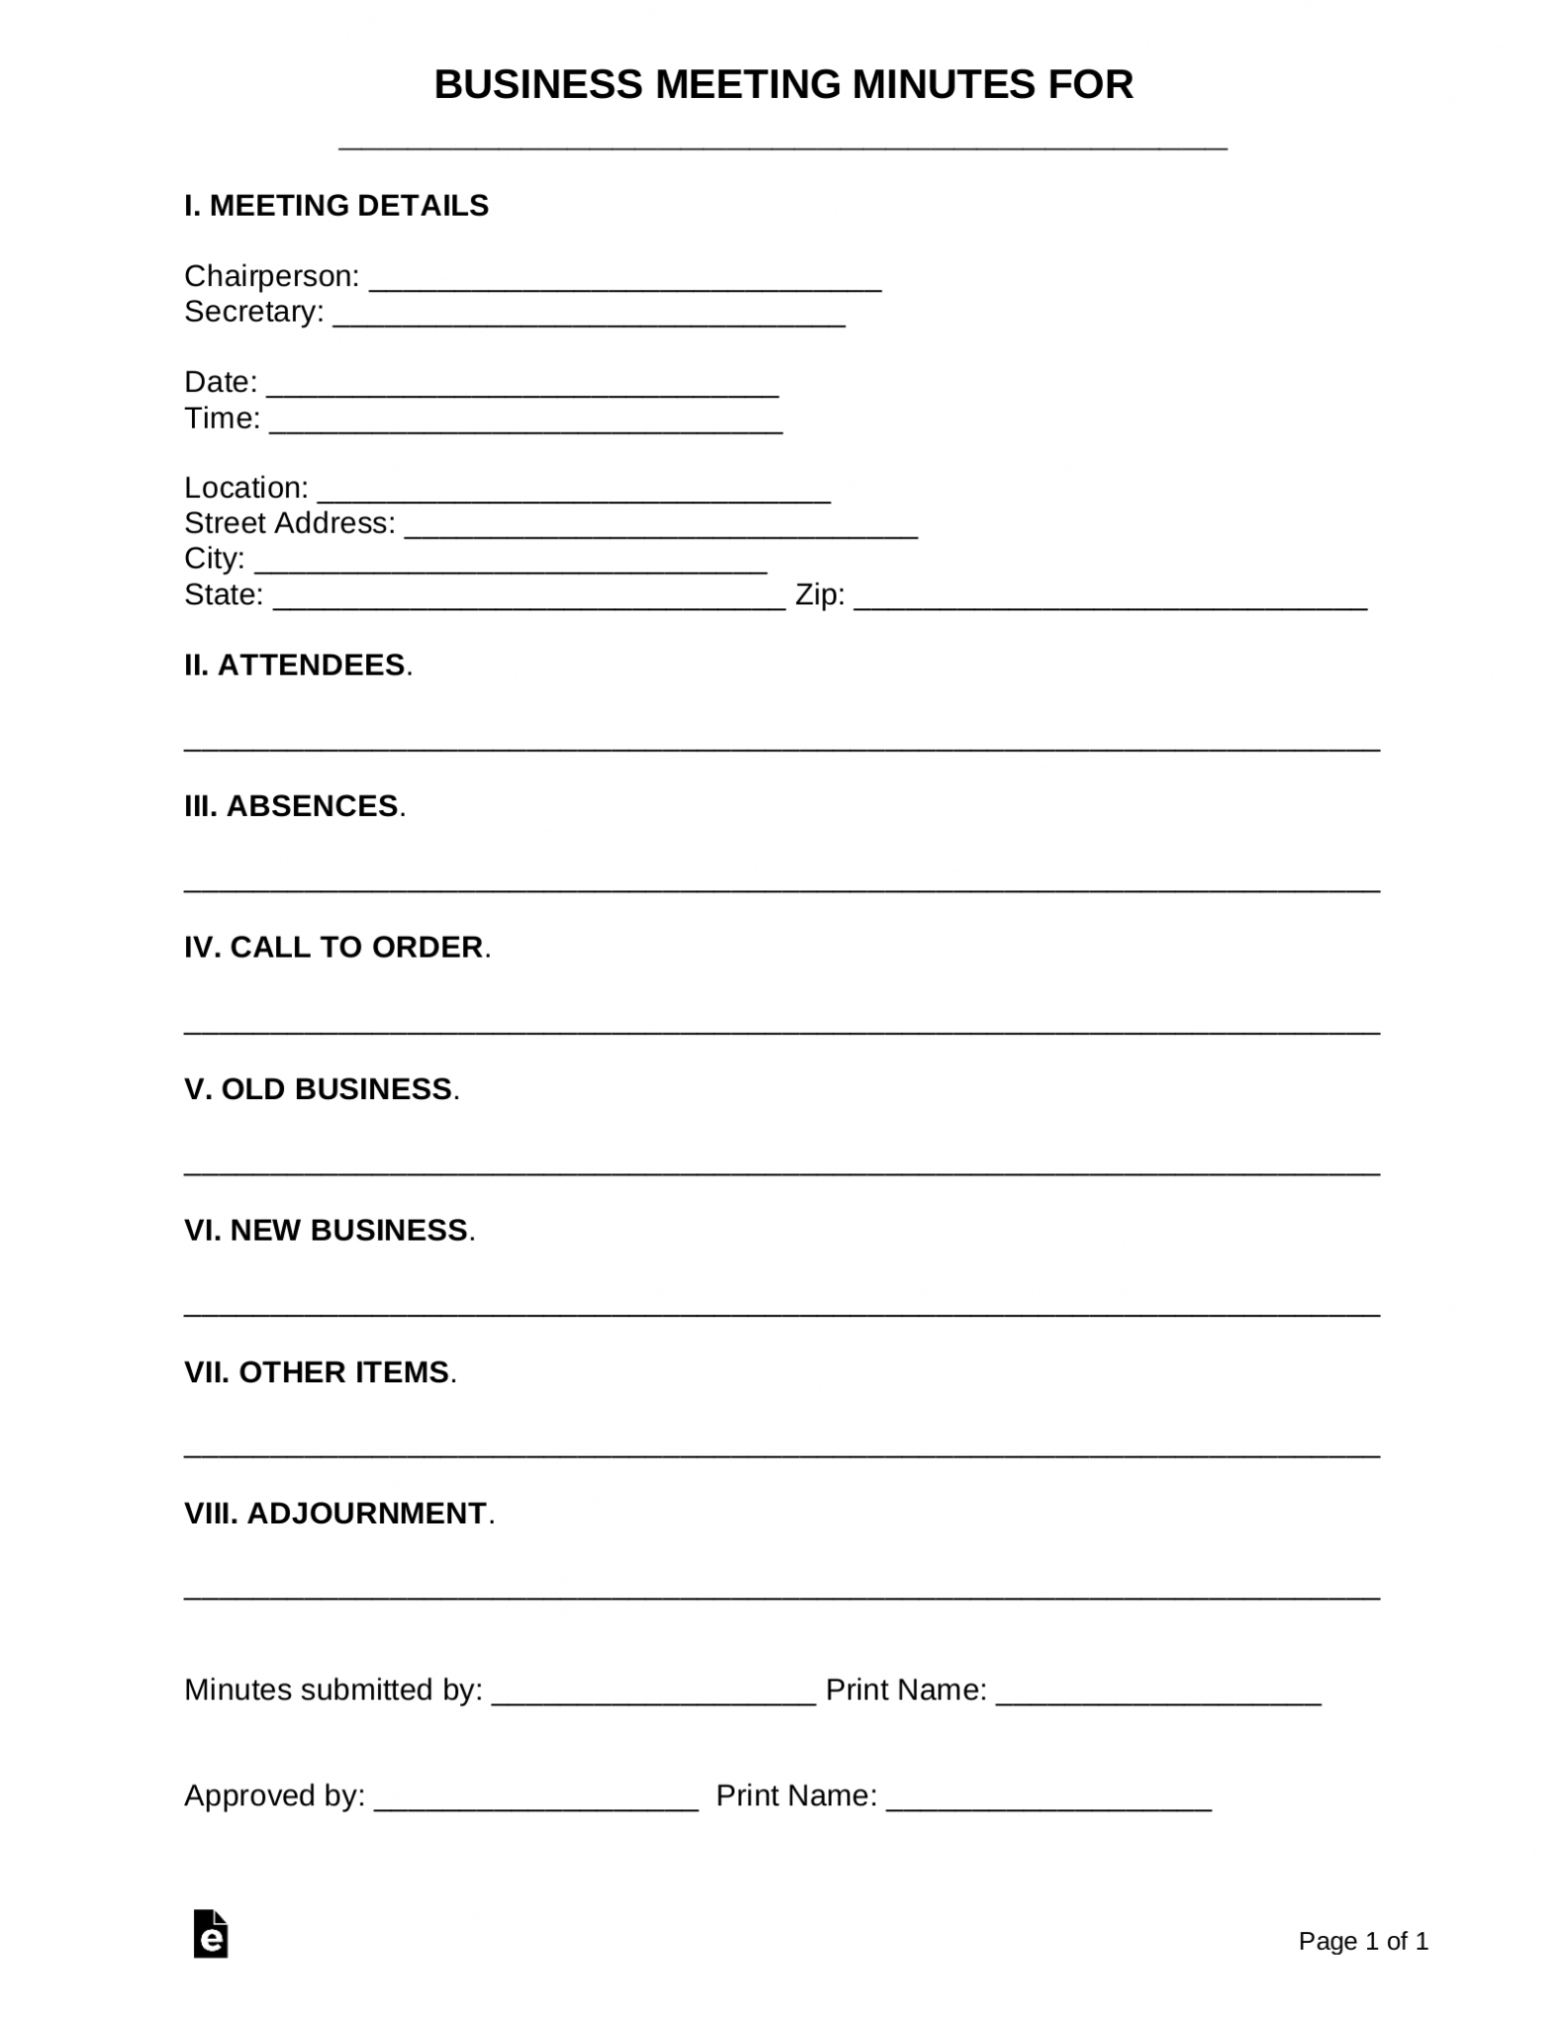 Free Business Meeting Minutes Template | Sample – Word | Pdf – Eforms Throughout Meeting Minutes Template Doc